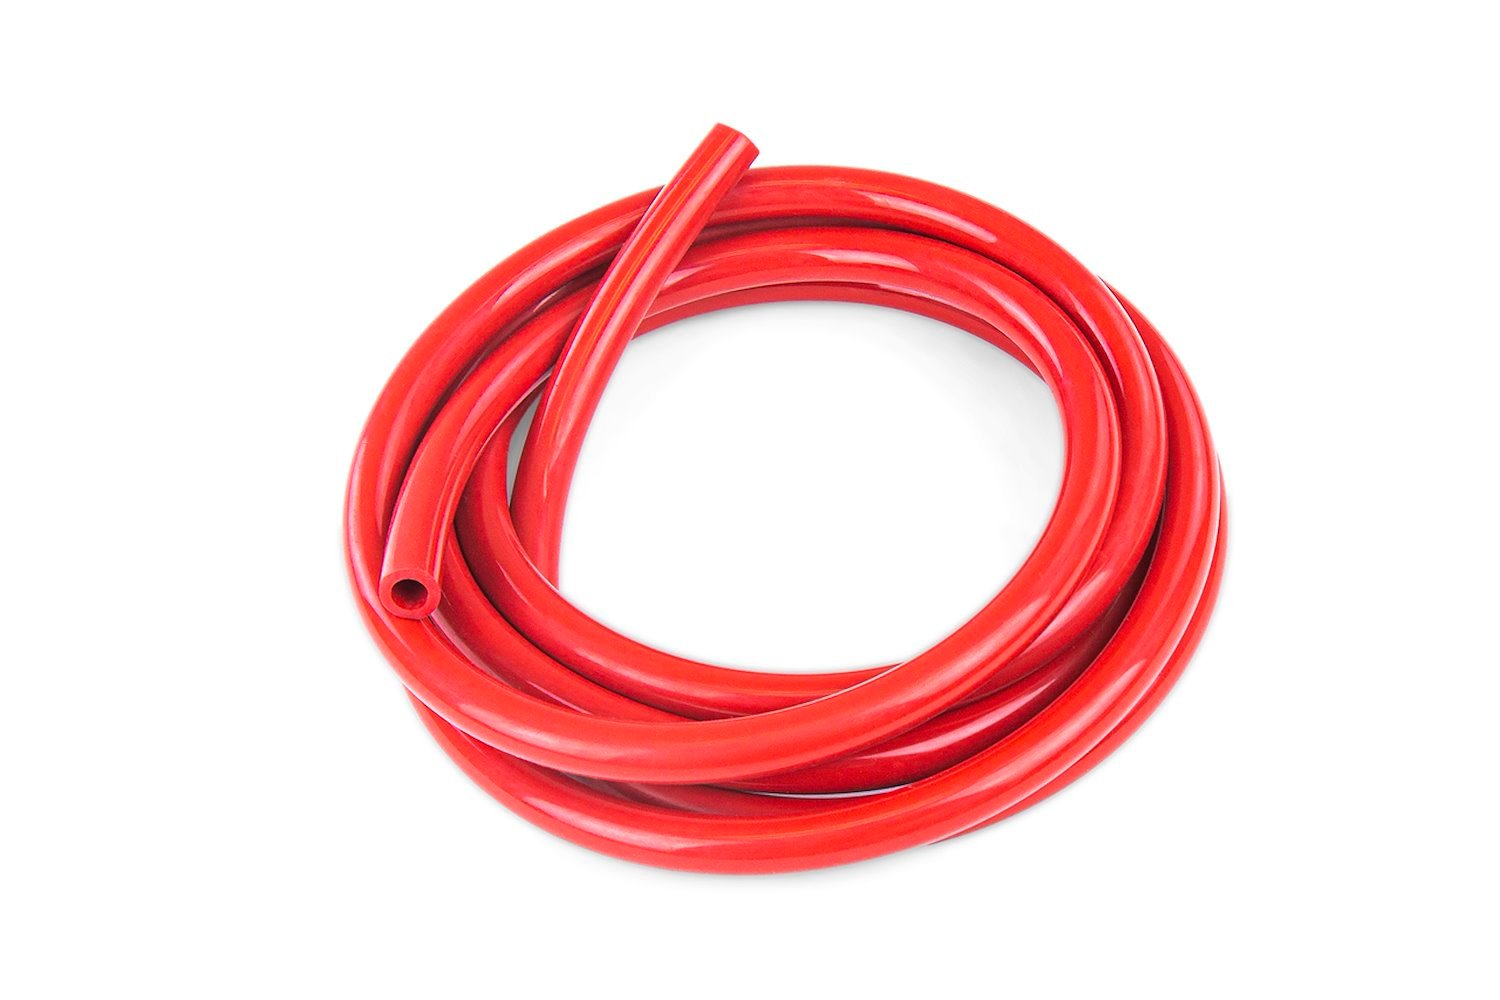 HTSVH2-REDx5 High-Temperature Silicone Vacuum Hose Tubing, 5/64 in. ID, 5 ft. Roll, Red